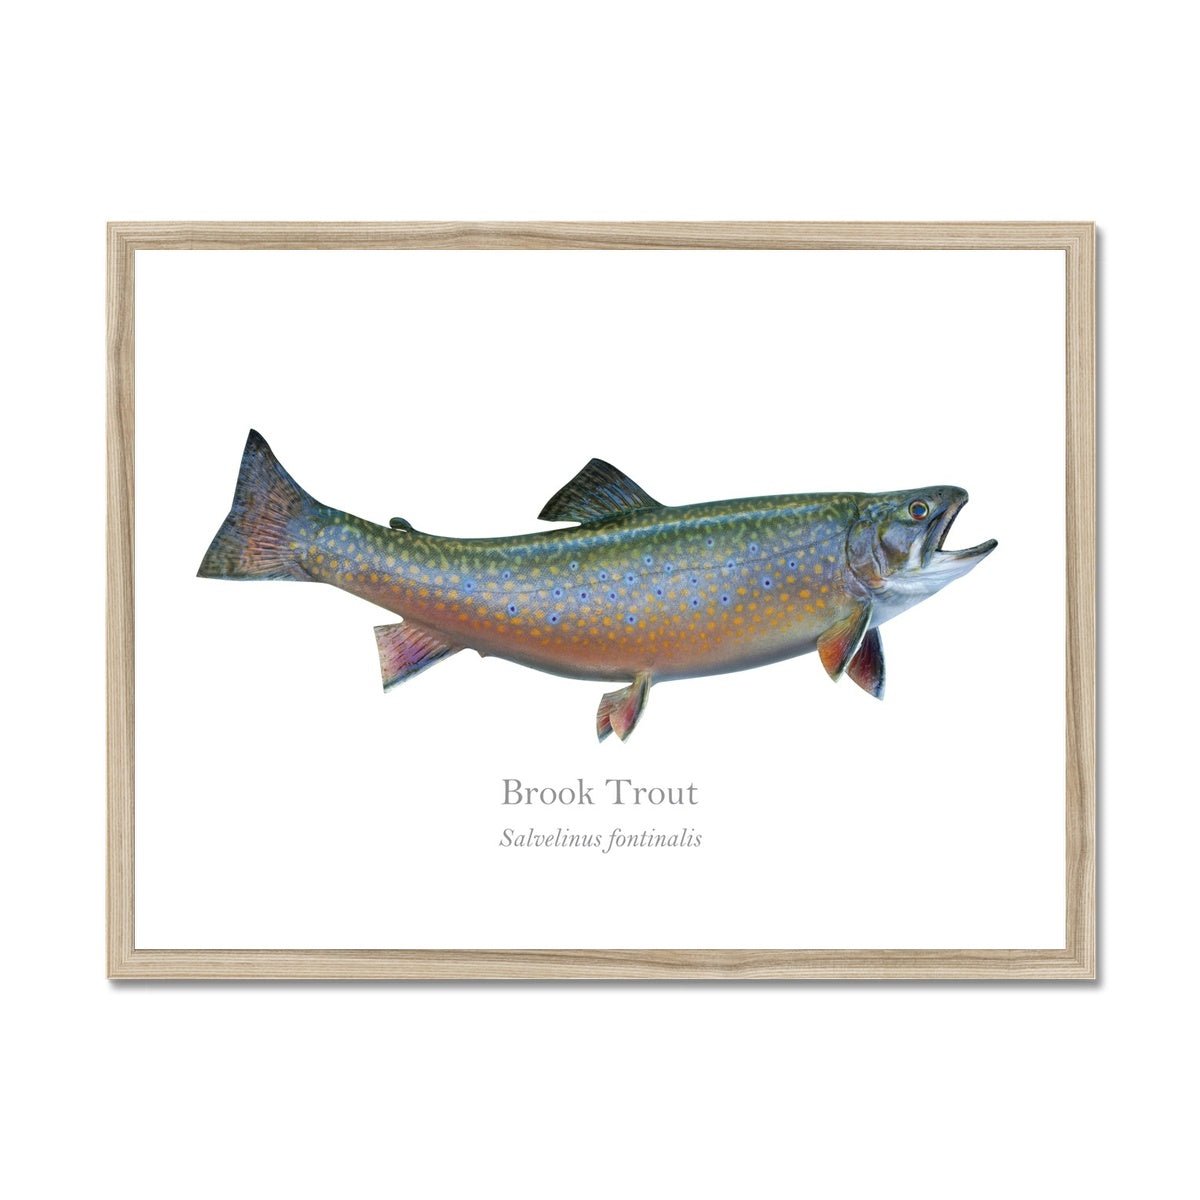 Brook Trout - Framed Print - With Scientific Name - madfishlab.com